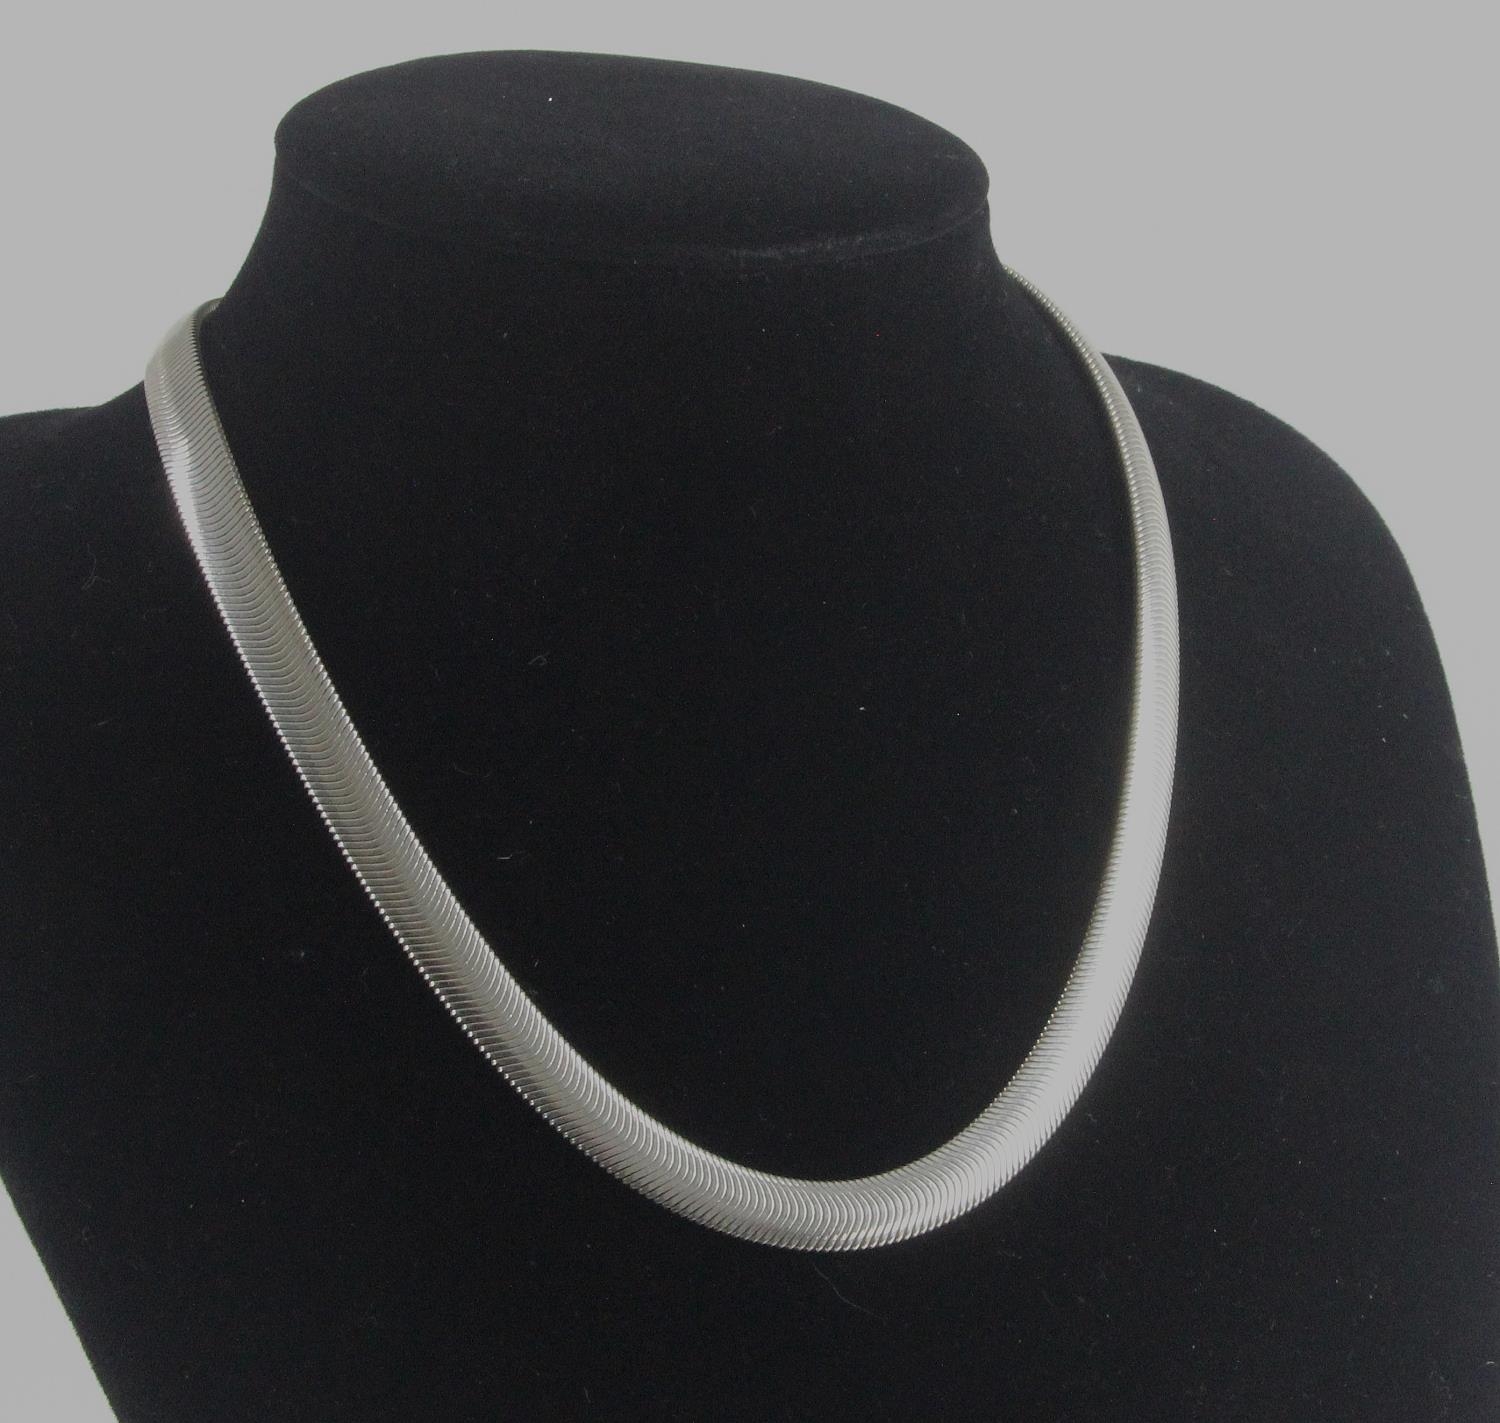 Solid silver herringbone design necklace 8mm wide, weighs 43.4gms with lobster clasp.